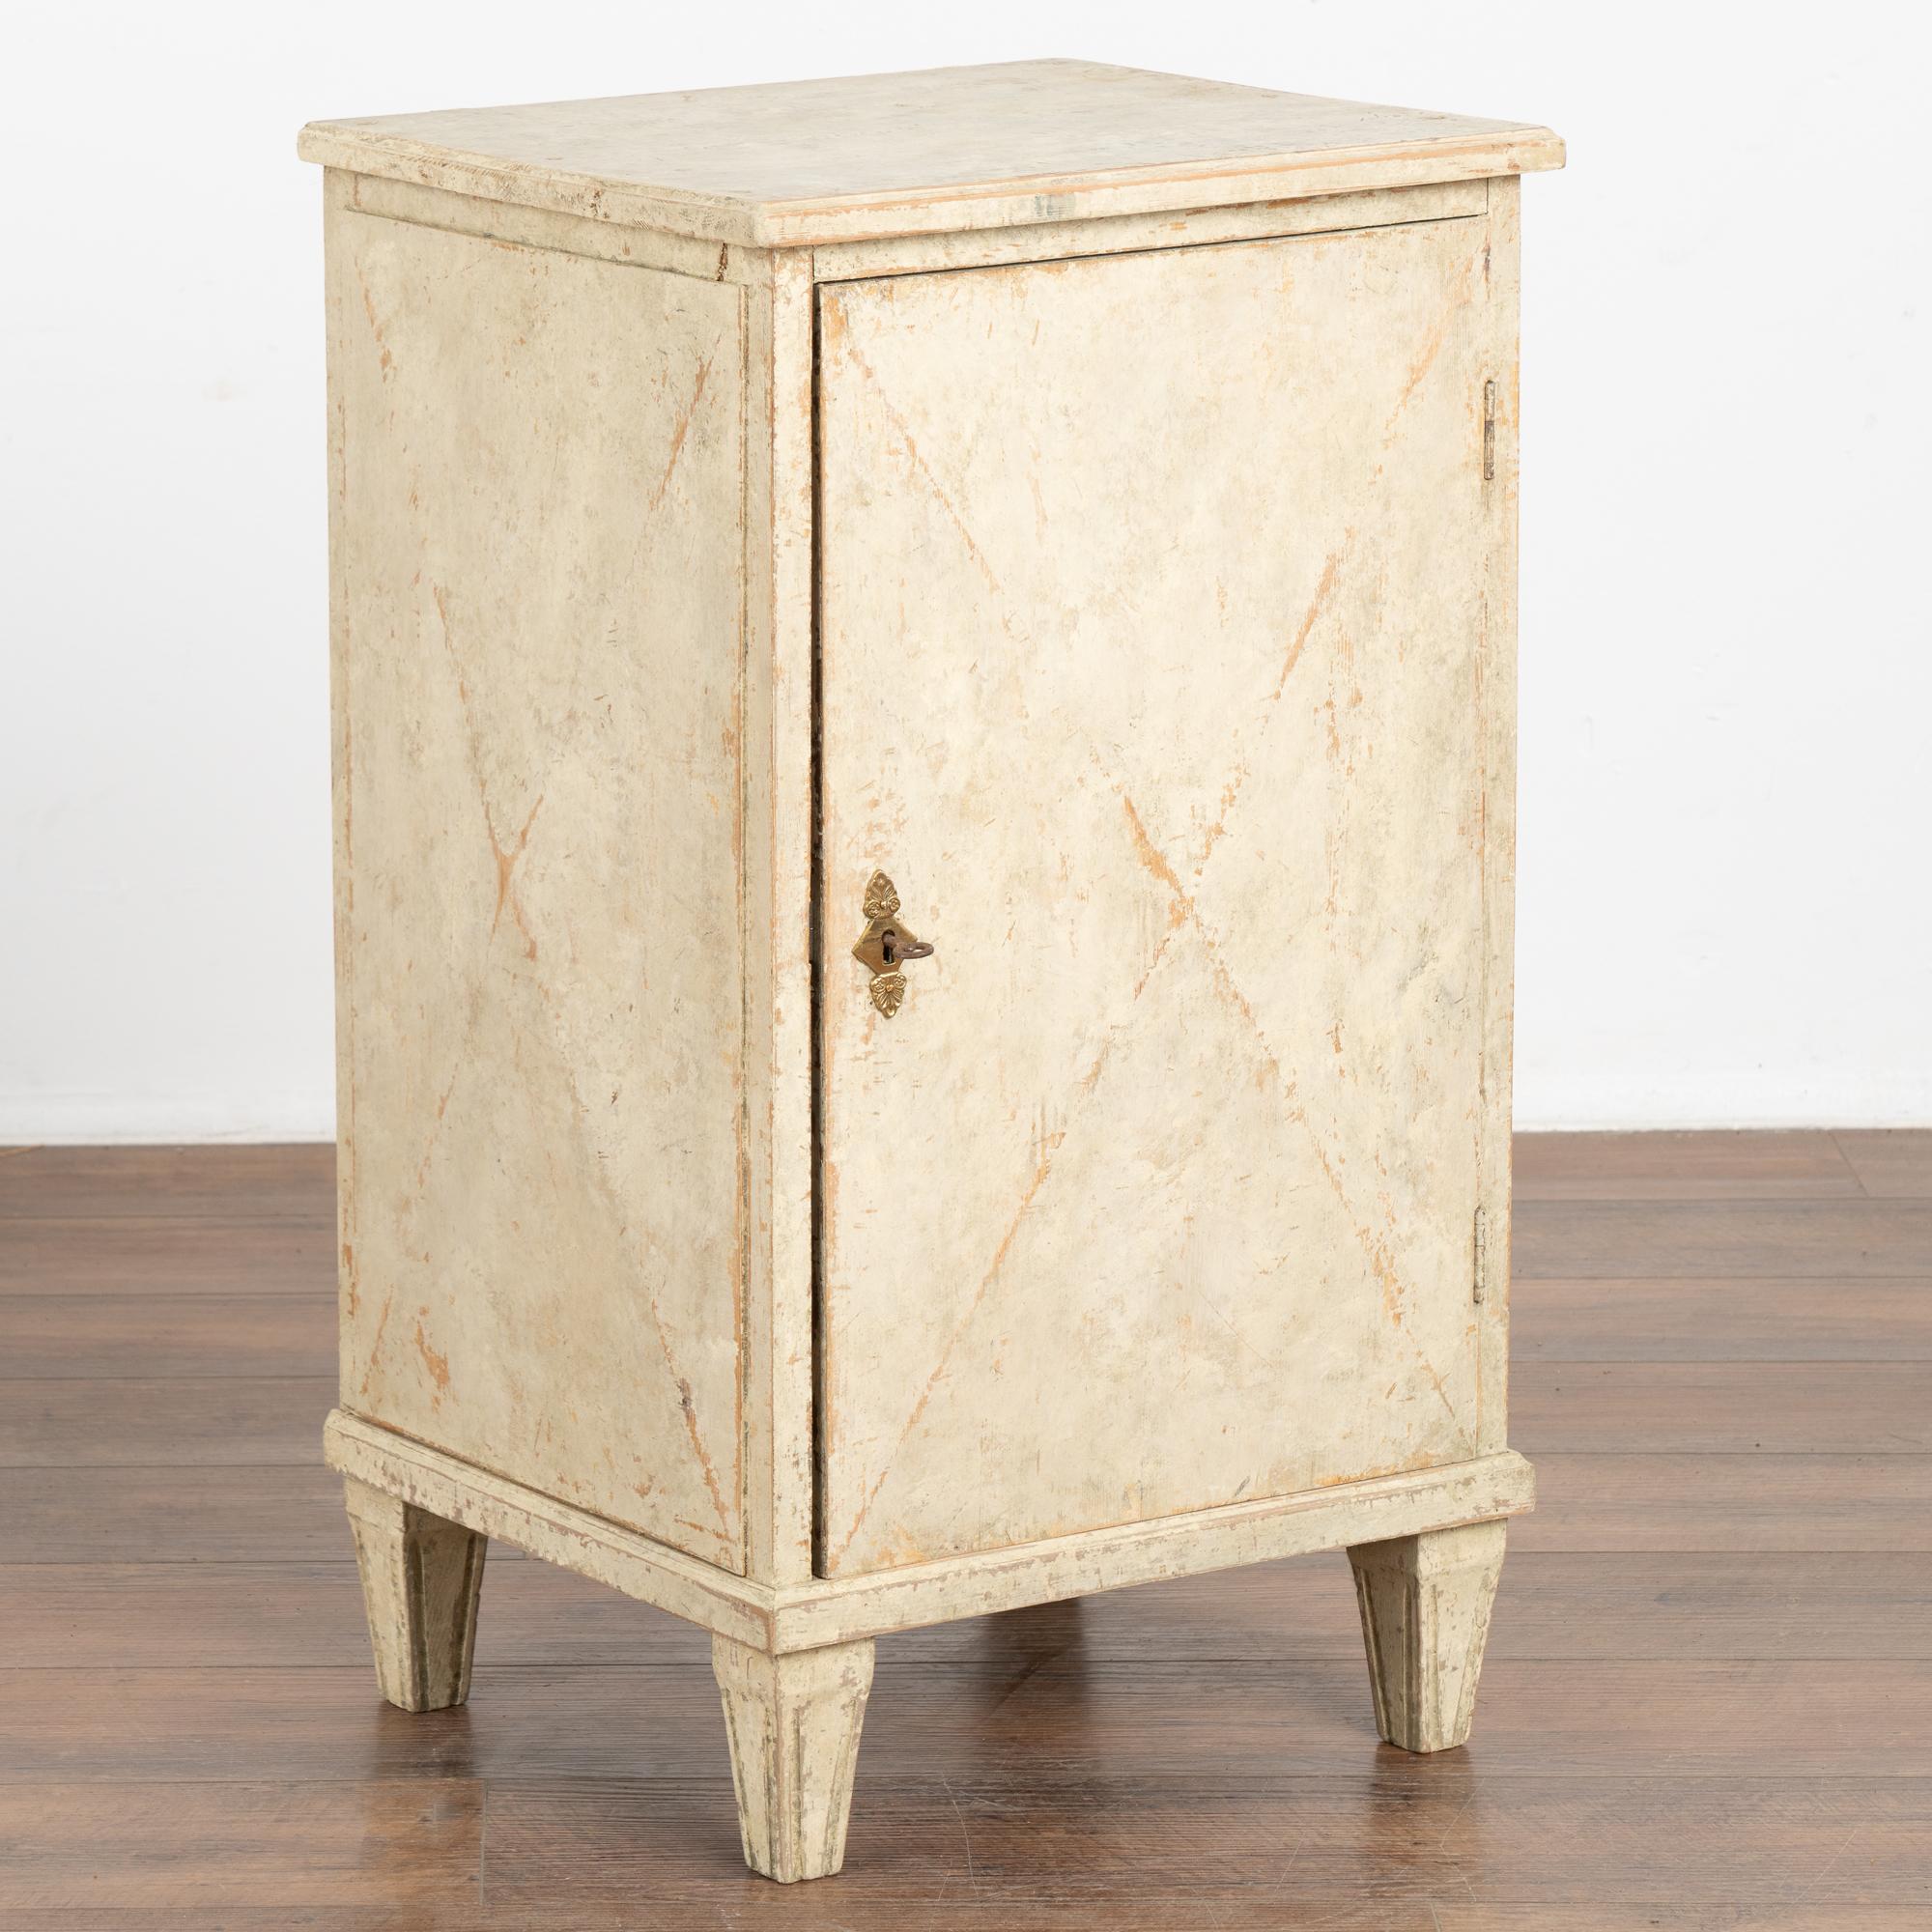 Small Swedish country antique white painted nightstand or side table standing on fluted tapered feet. May have served as a music cabinet to store sheet music.
Slightly raised diamond motif on front panel door and sides. Gentle distressing to the